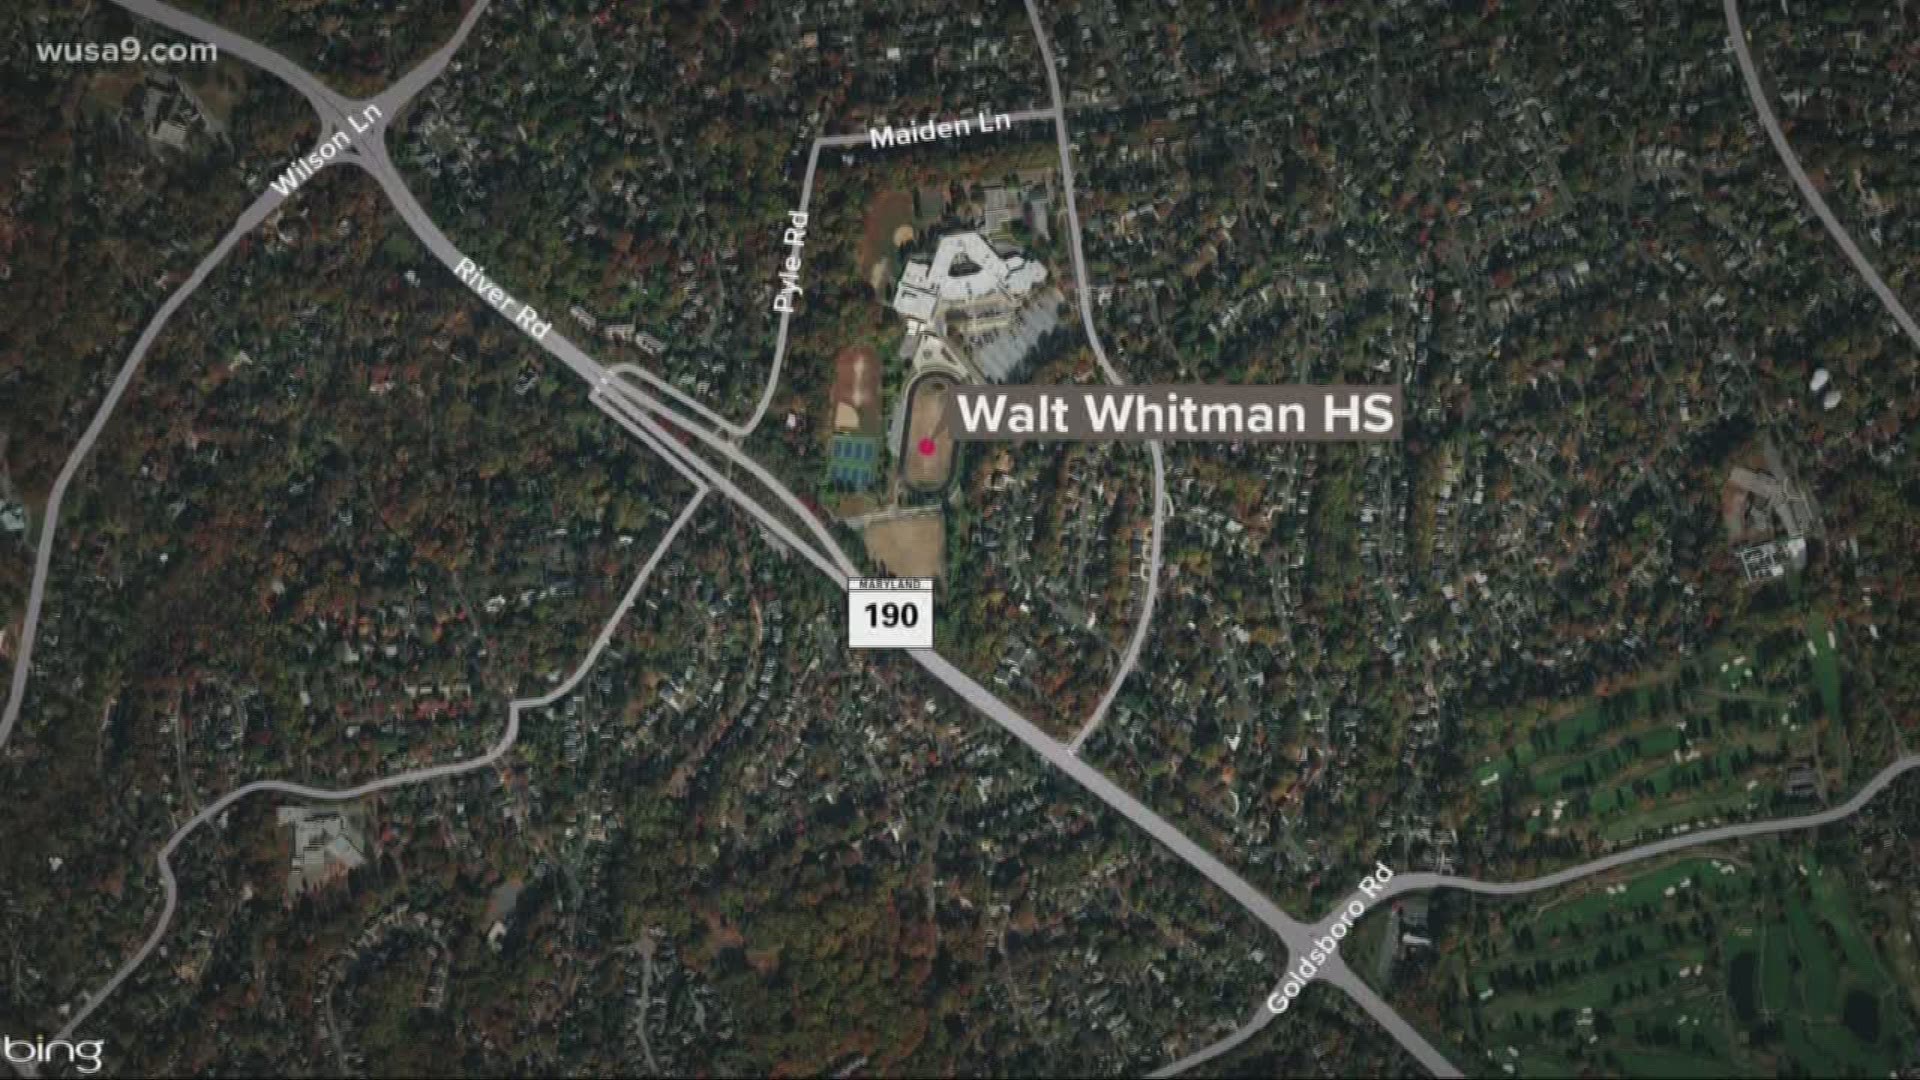 Two Whitman High School students posted a photo of themselves with blackface and wrote the n-word on it on social media over the weekend, school officials said. Scott Broom spoke with an African American student leader to help all of us understand why this is no joke among kids to just brush off.